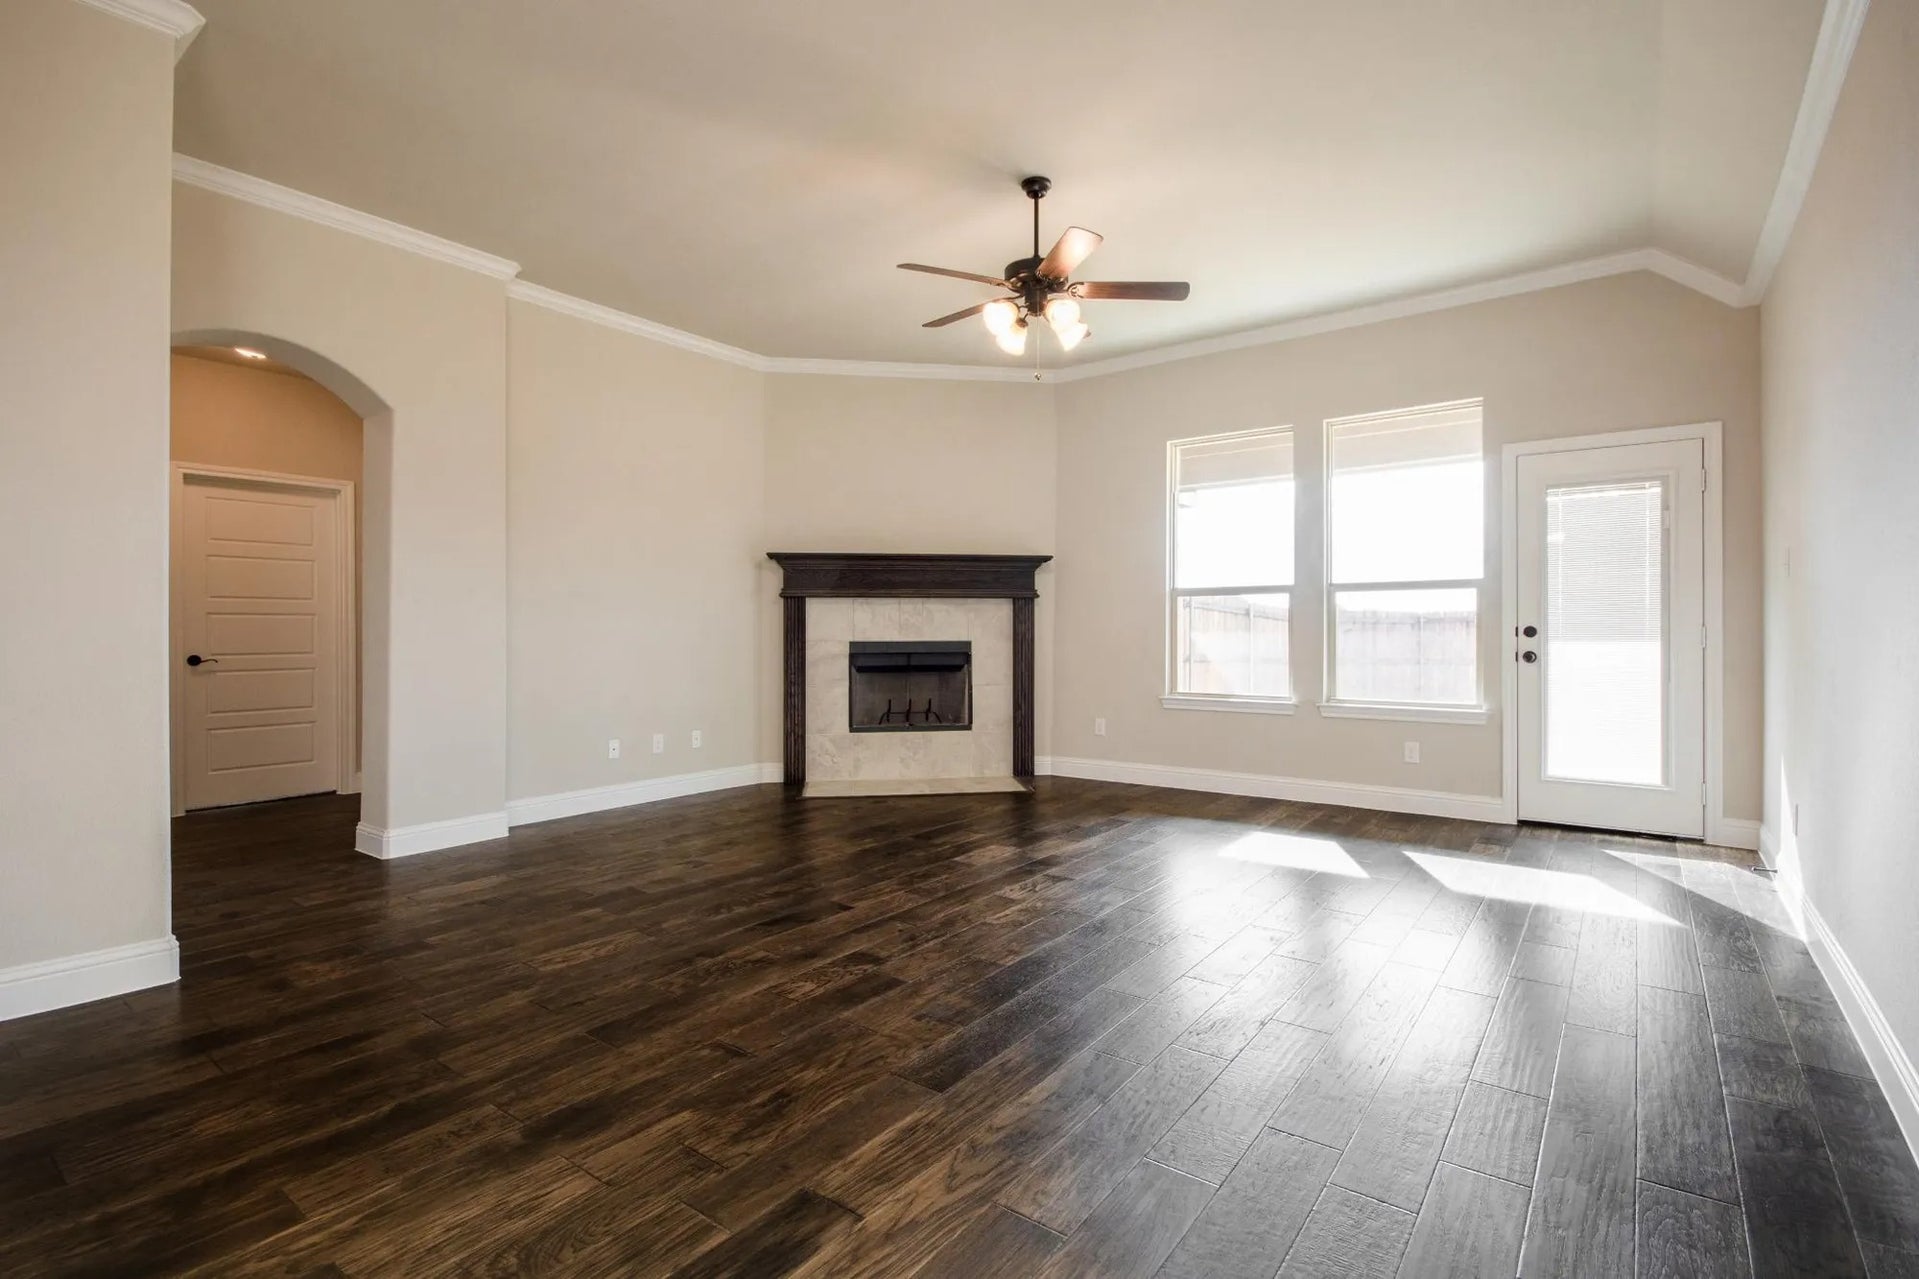 4br New Home in Midlothian, TX